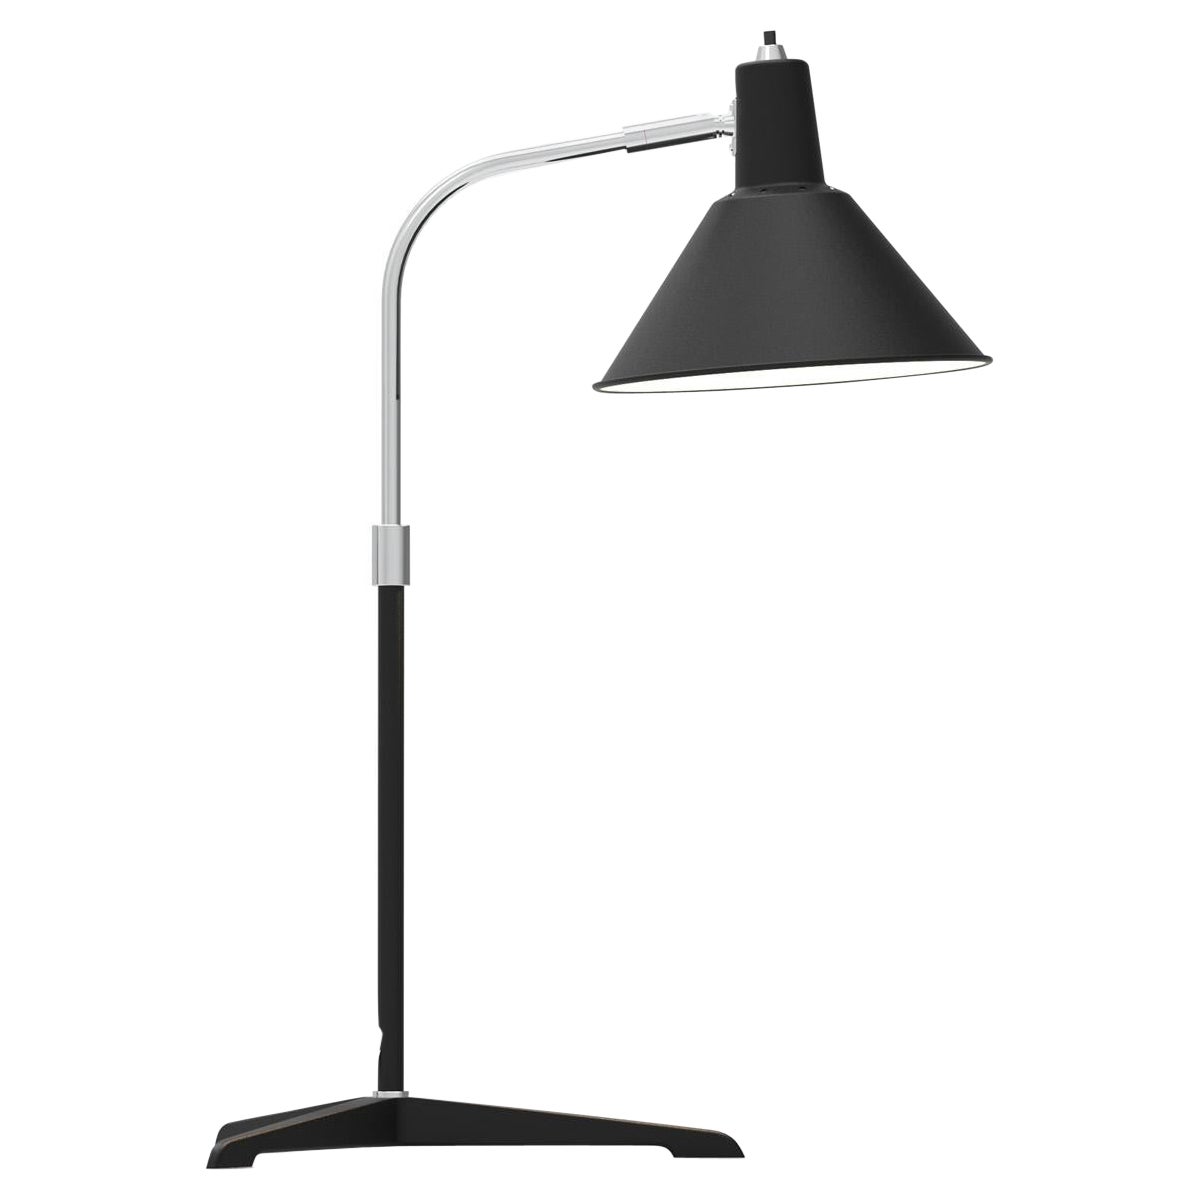 Arcon Table Lamp in Black/Chrome - By NUAD For Sale